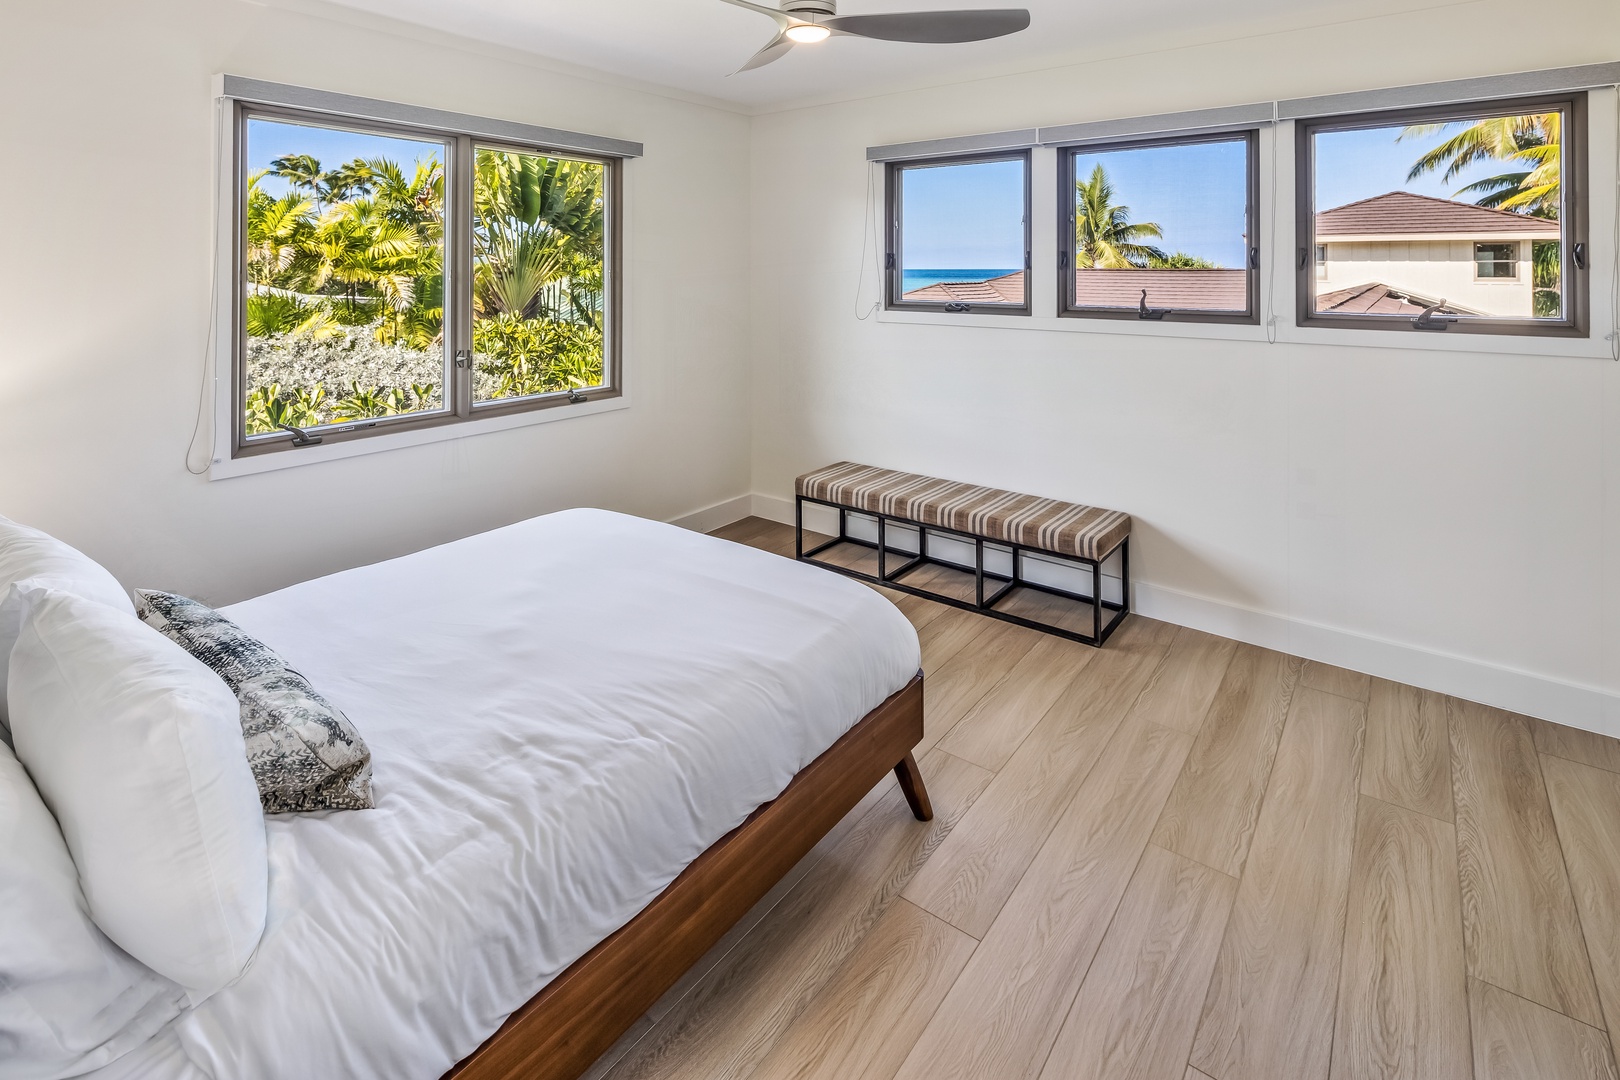 Kailua Vacation Rentals, Na Makana Villa - Guest Bedroom 5 with queen bed, partial ocean view, split AC, and ceiling fan